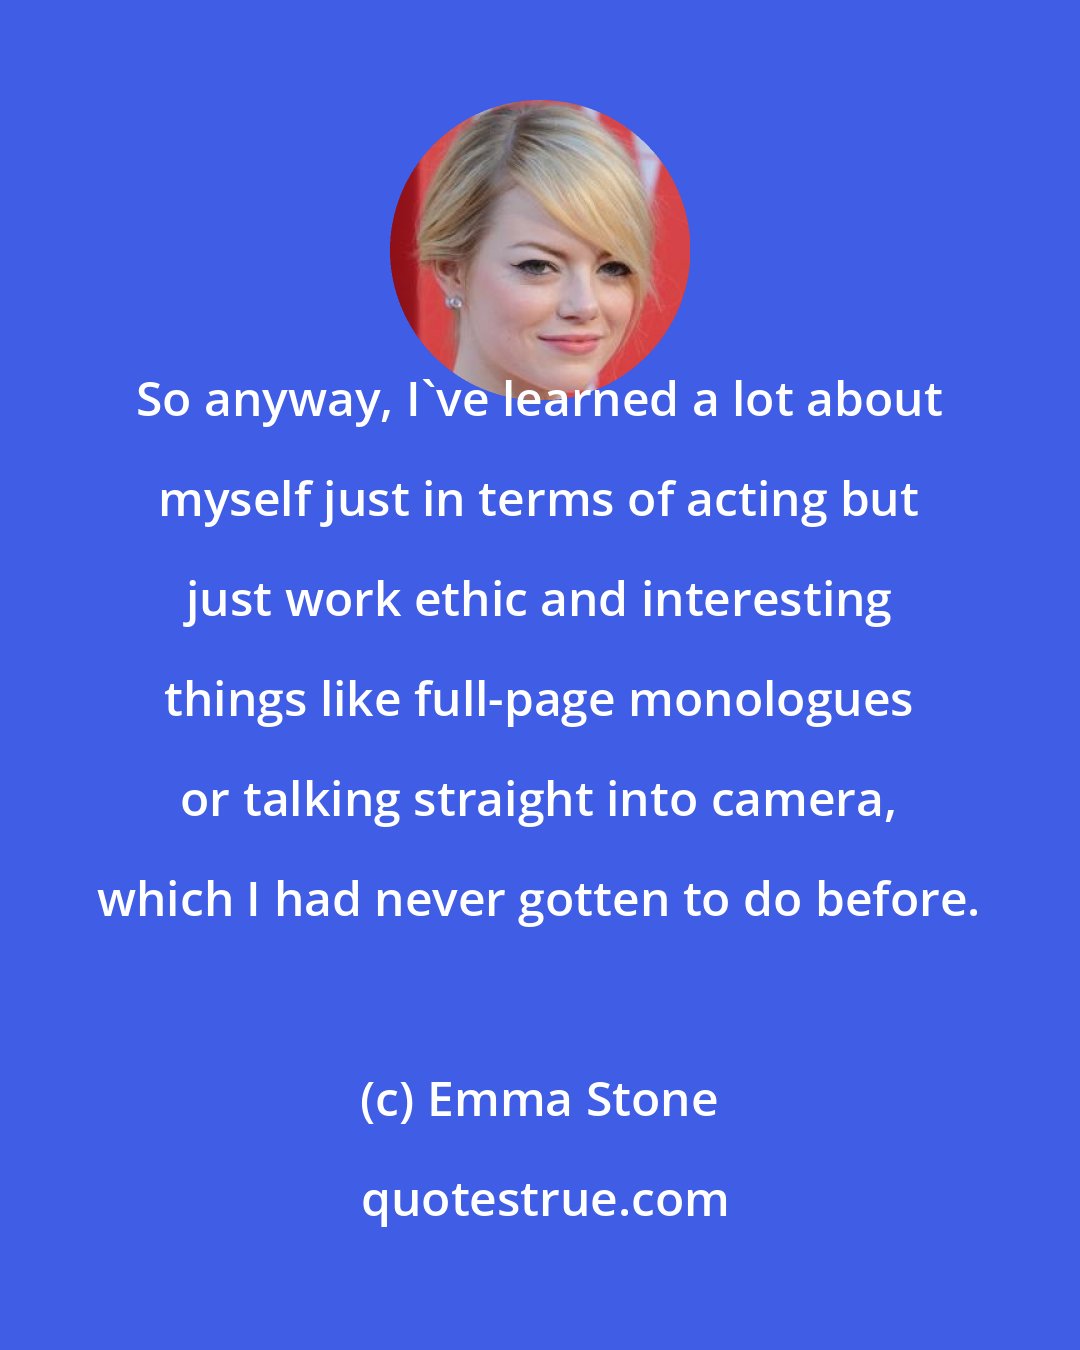 Emma Stone: So anyway, I've learned a lot about myself just in terms of acting but just work ethic and interesting things like full-page monologues or talking straight into camera, which I had never gotten to do before.